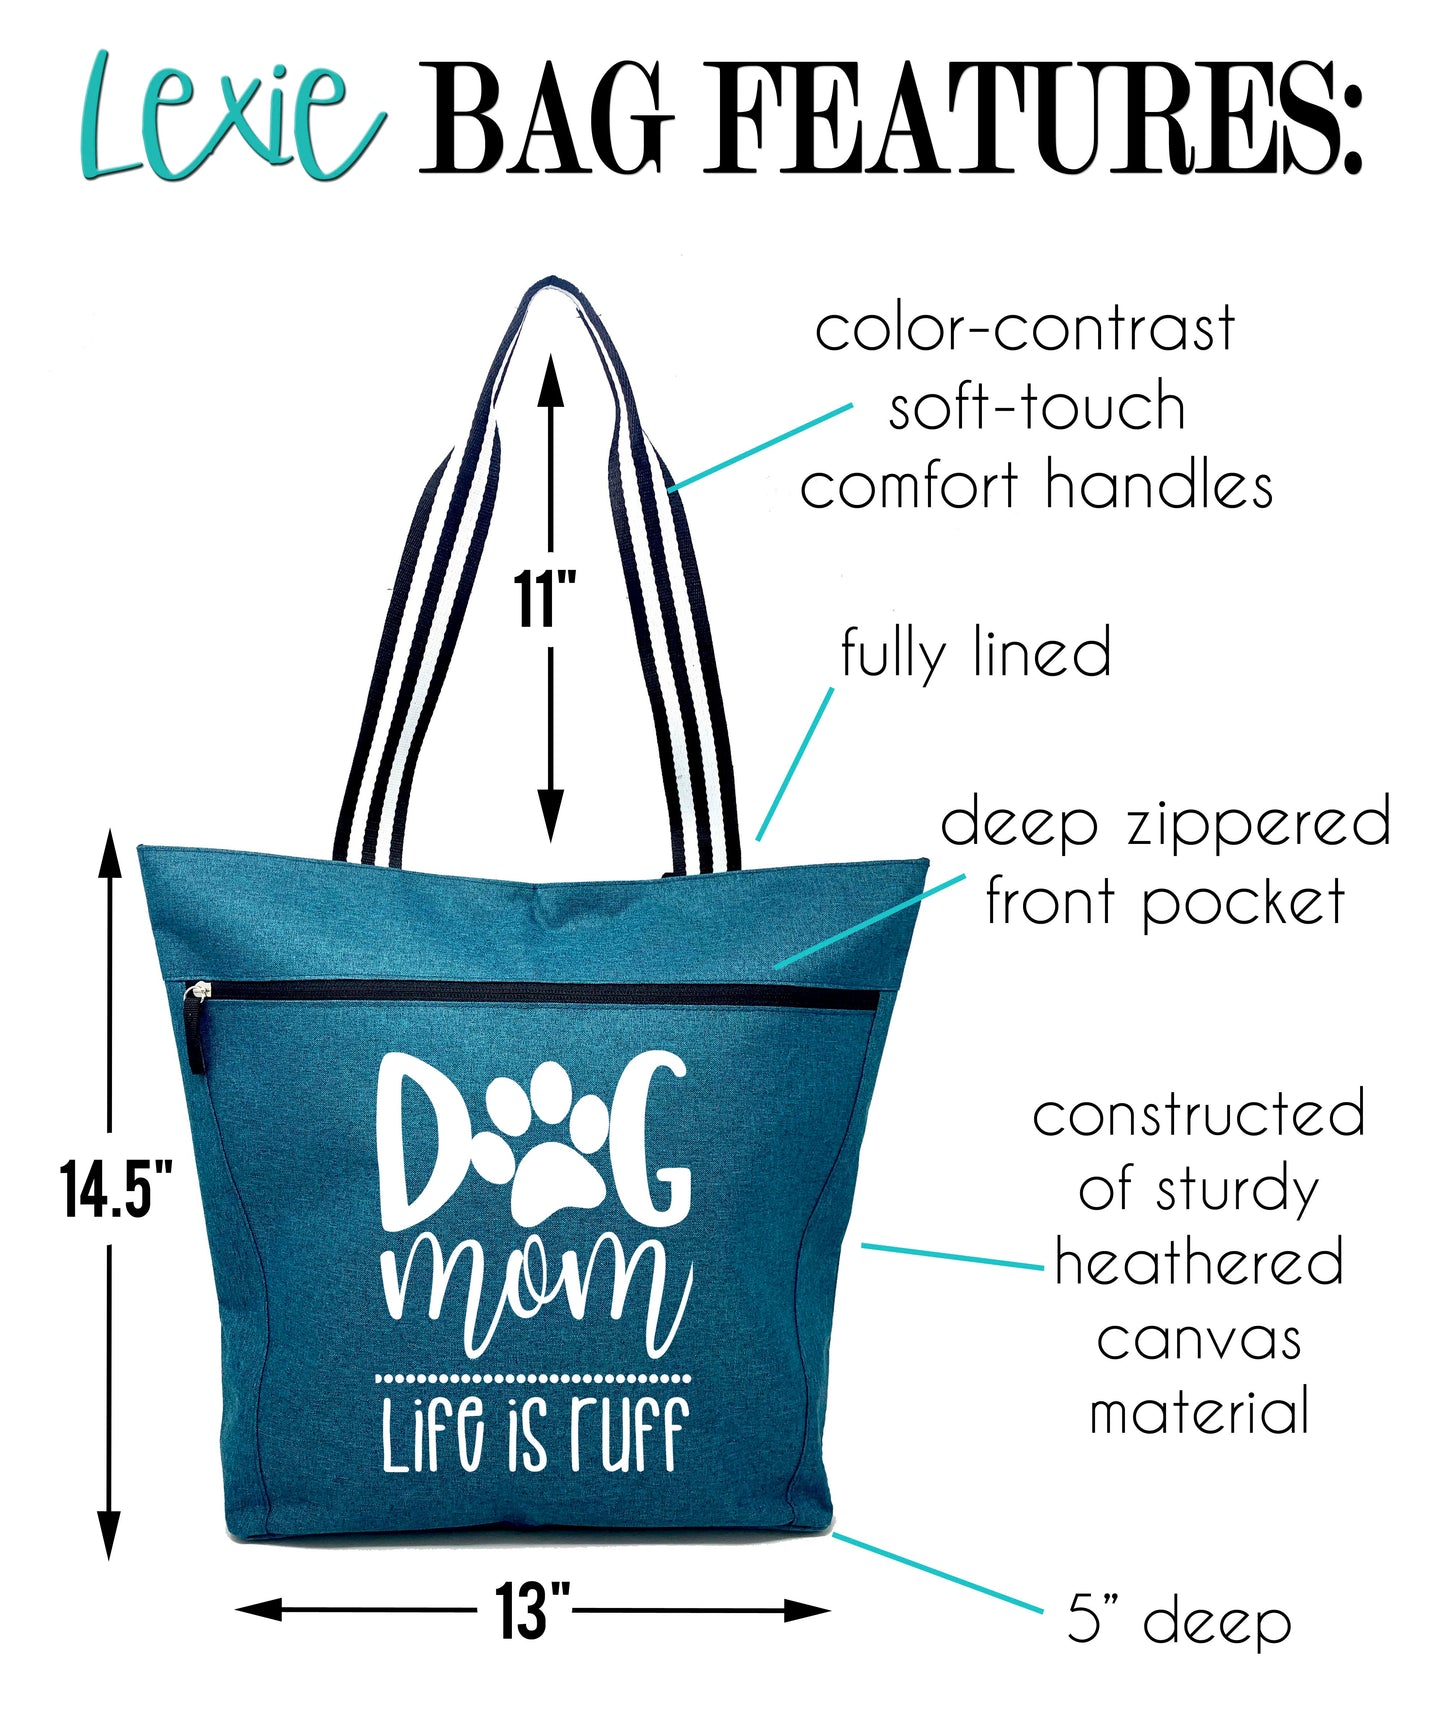 Dog Mom - Life is Ruff Lexie Teal Tote Bag for Dog Lovers - Outlet Deal Utah